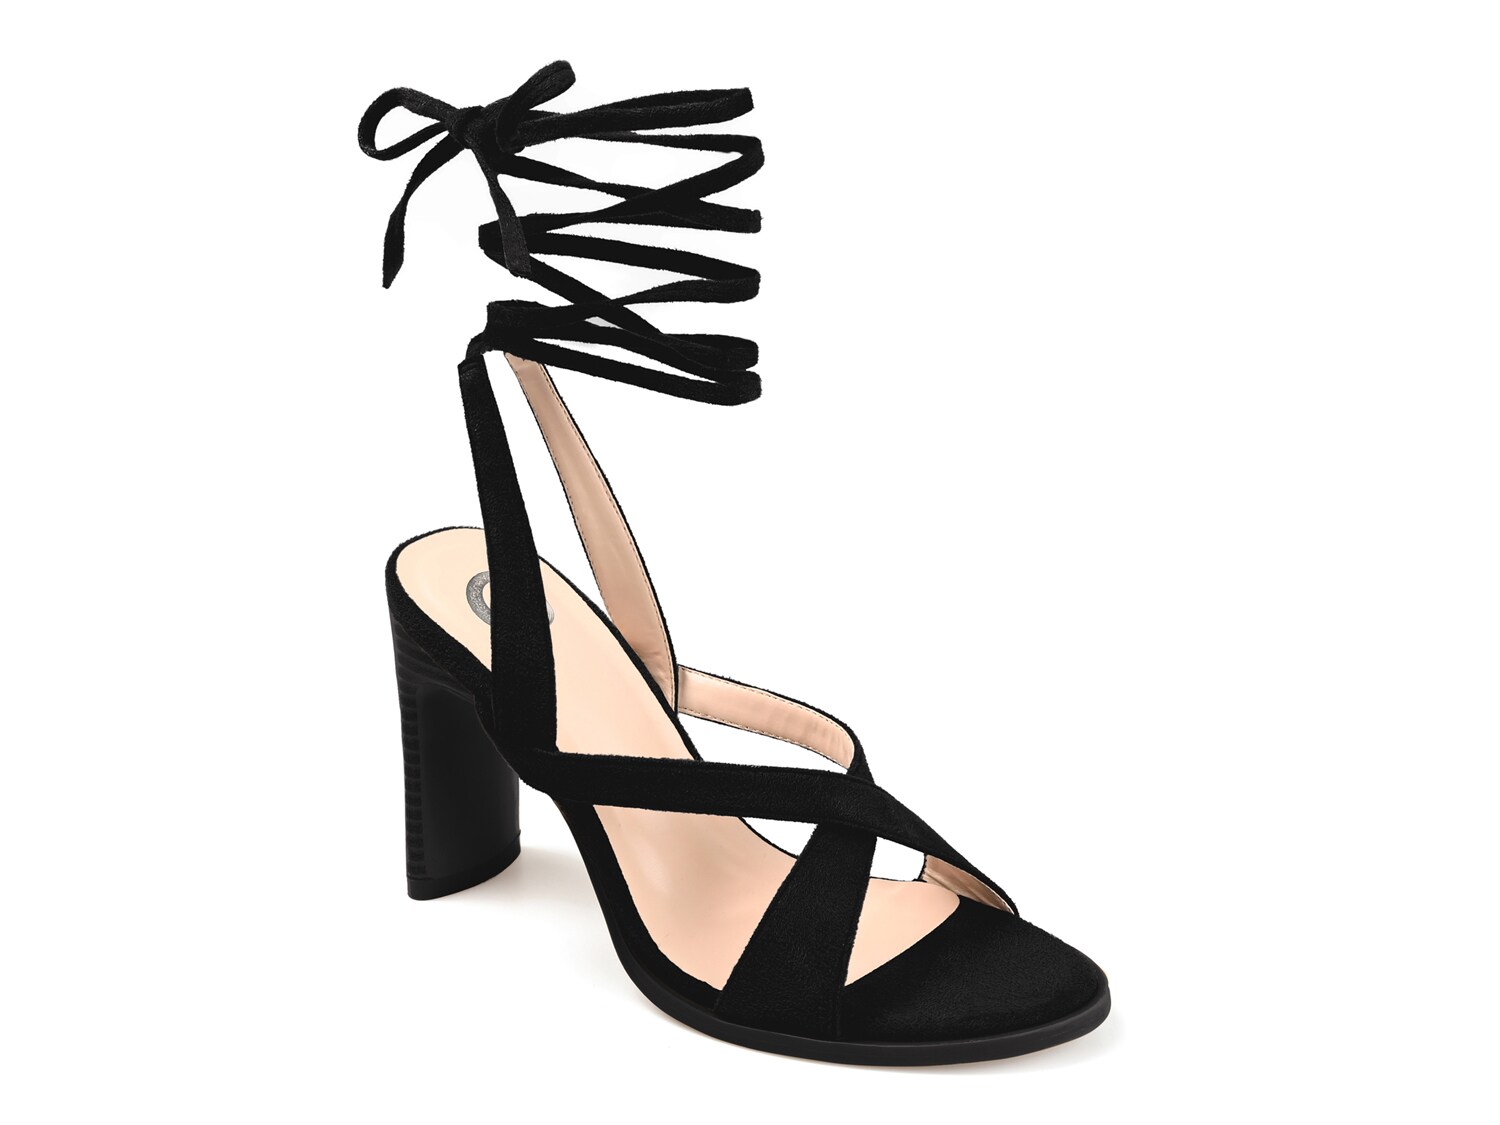 Journee Collection Adalee Sandal - Free Shipping | DSW